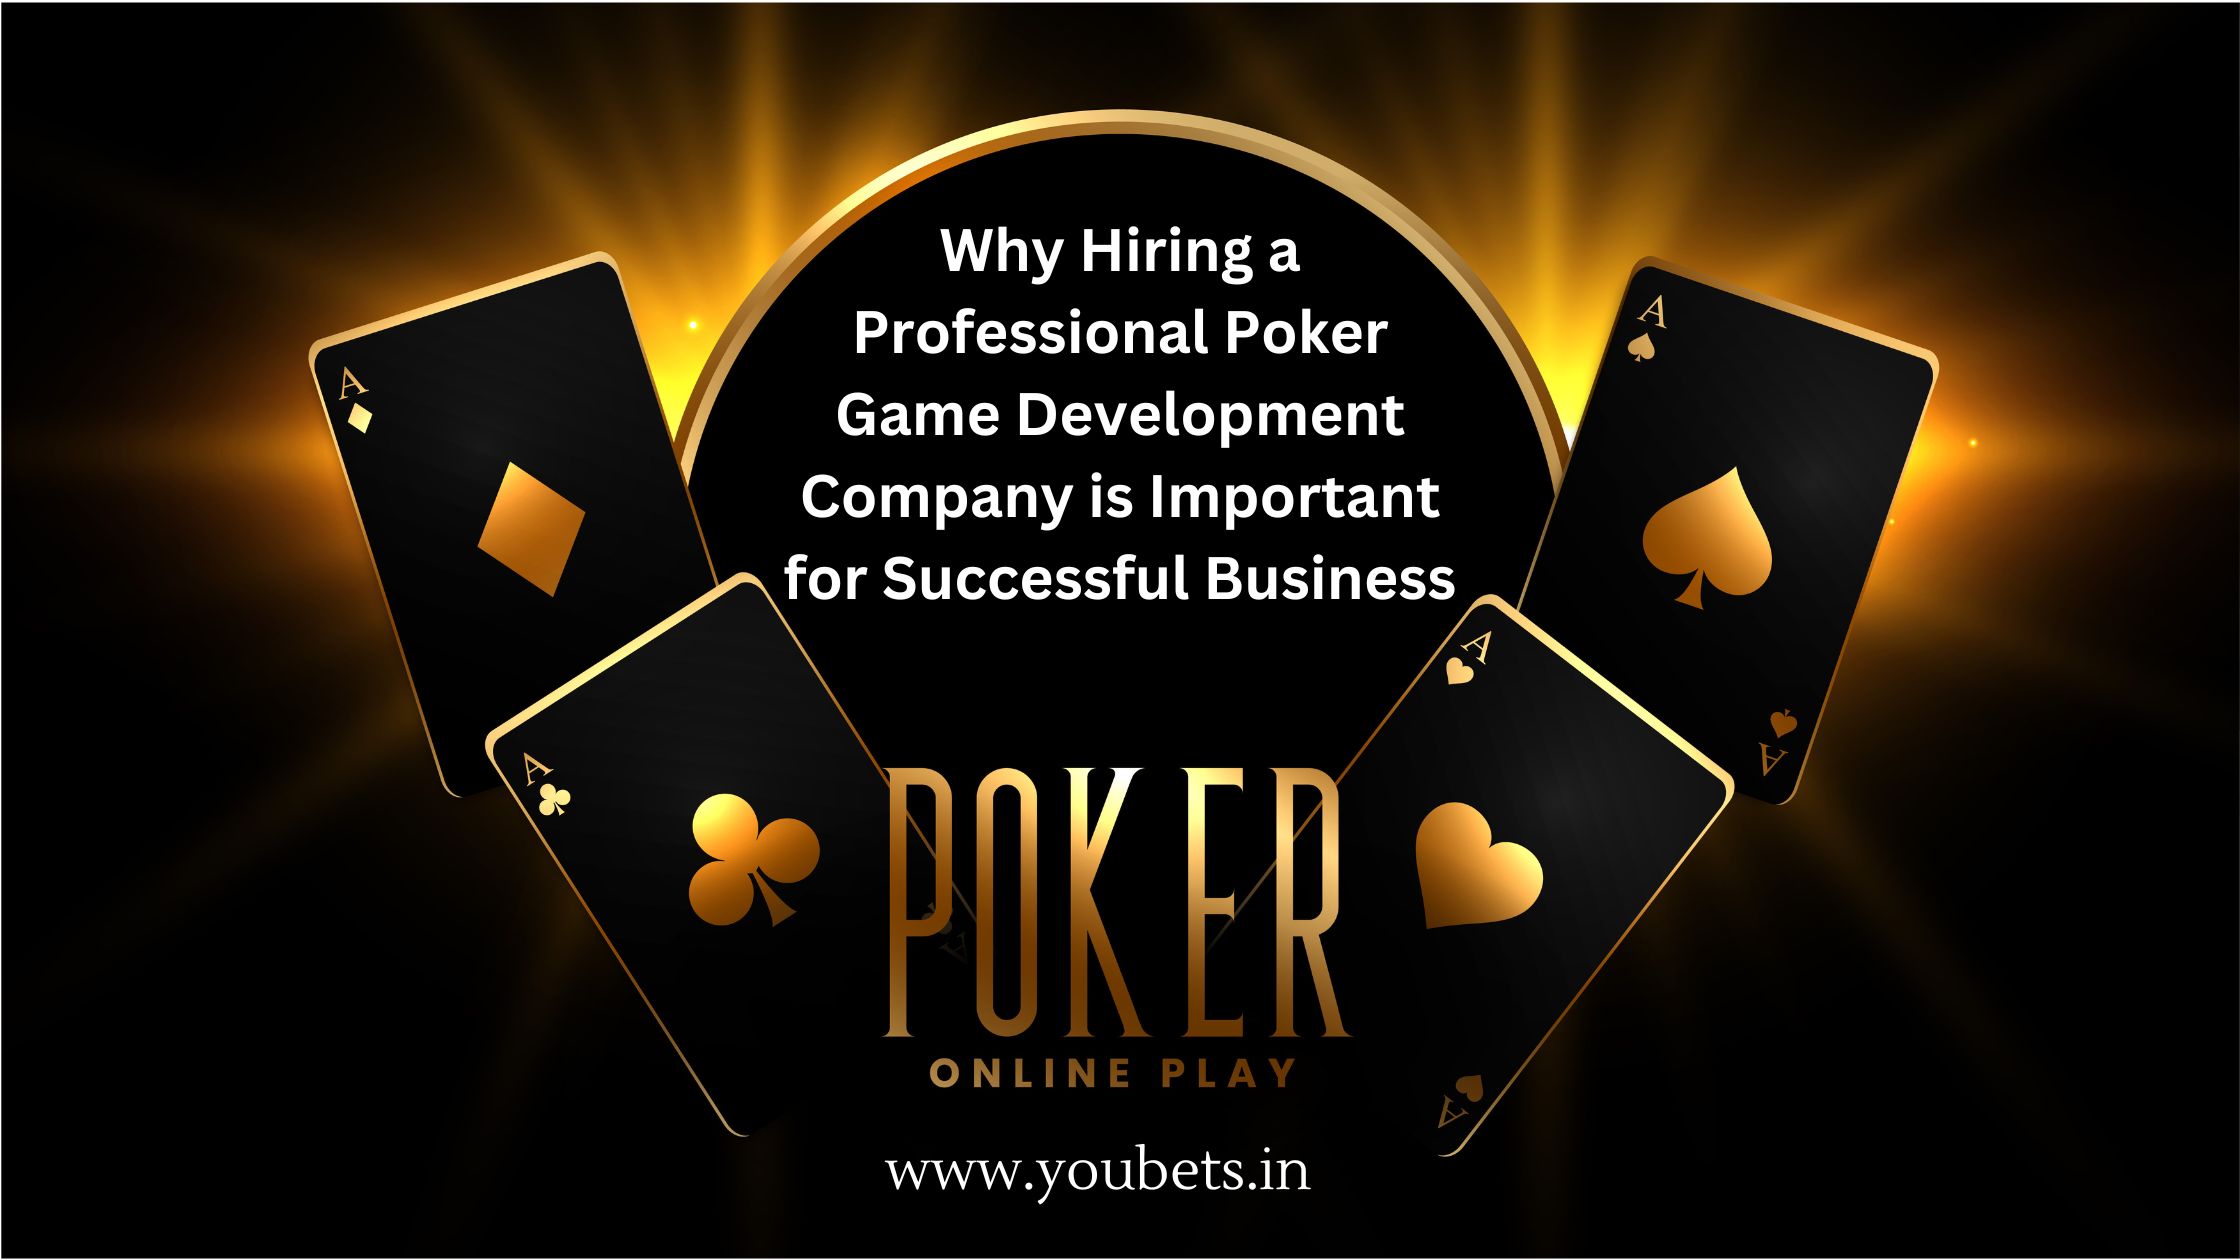 Why Hiring a Professional Poker Game Development Company is Vital for Successful Business